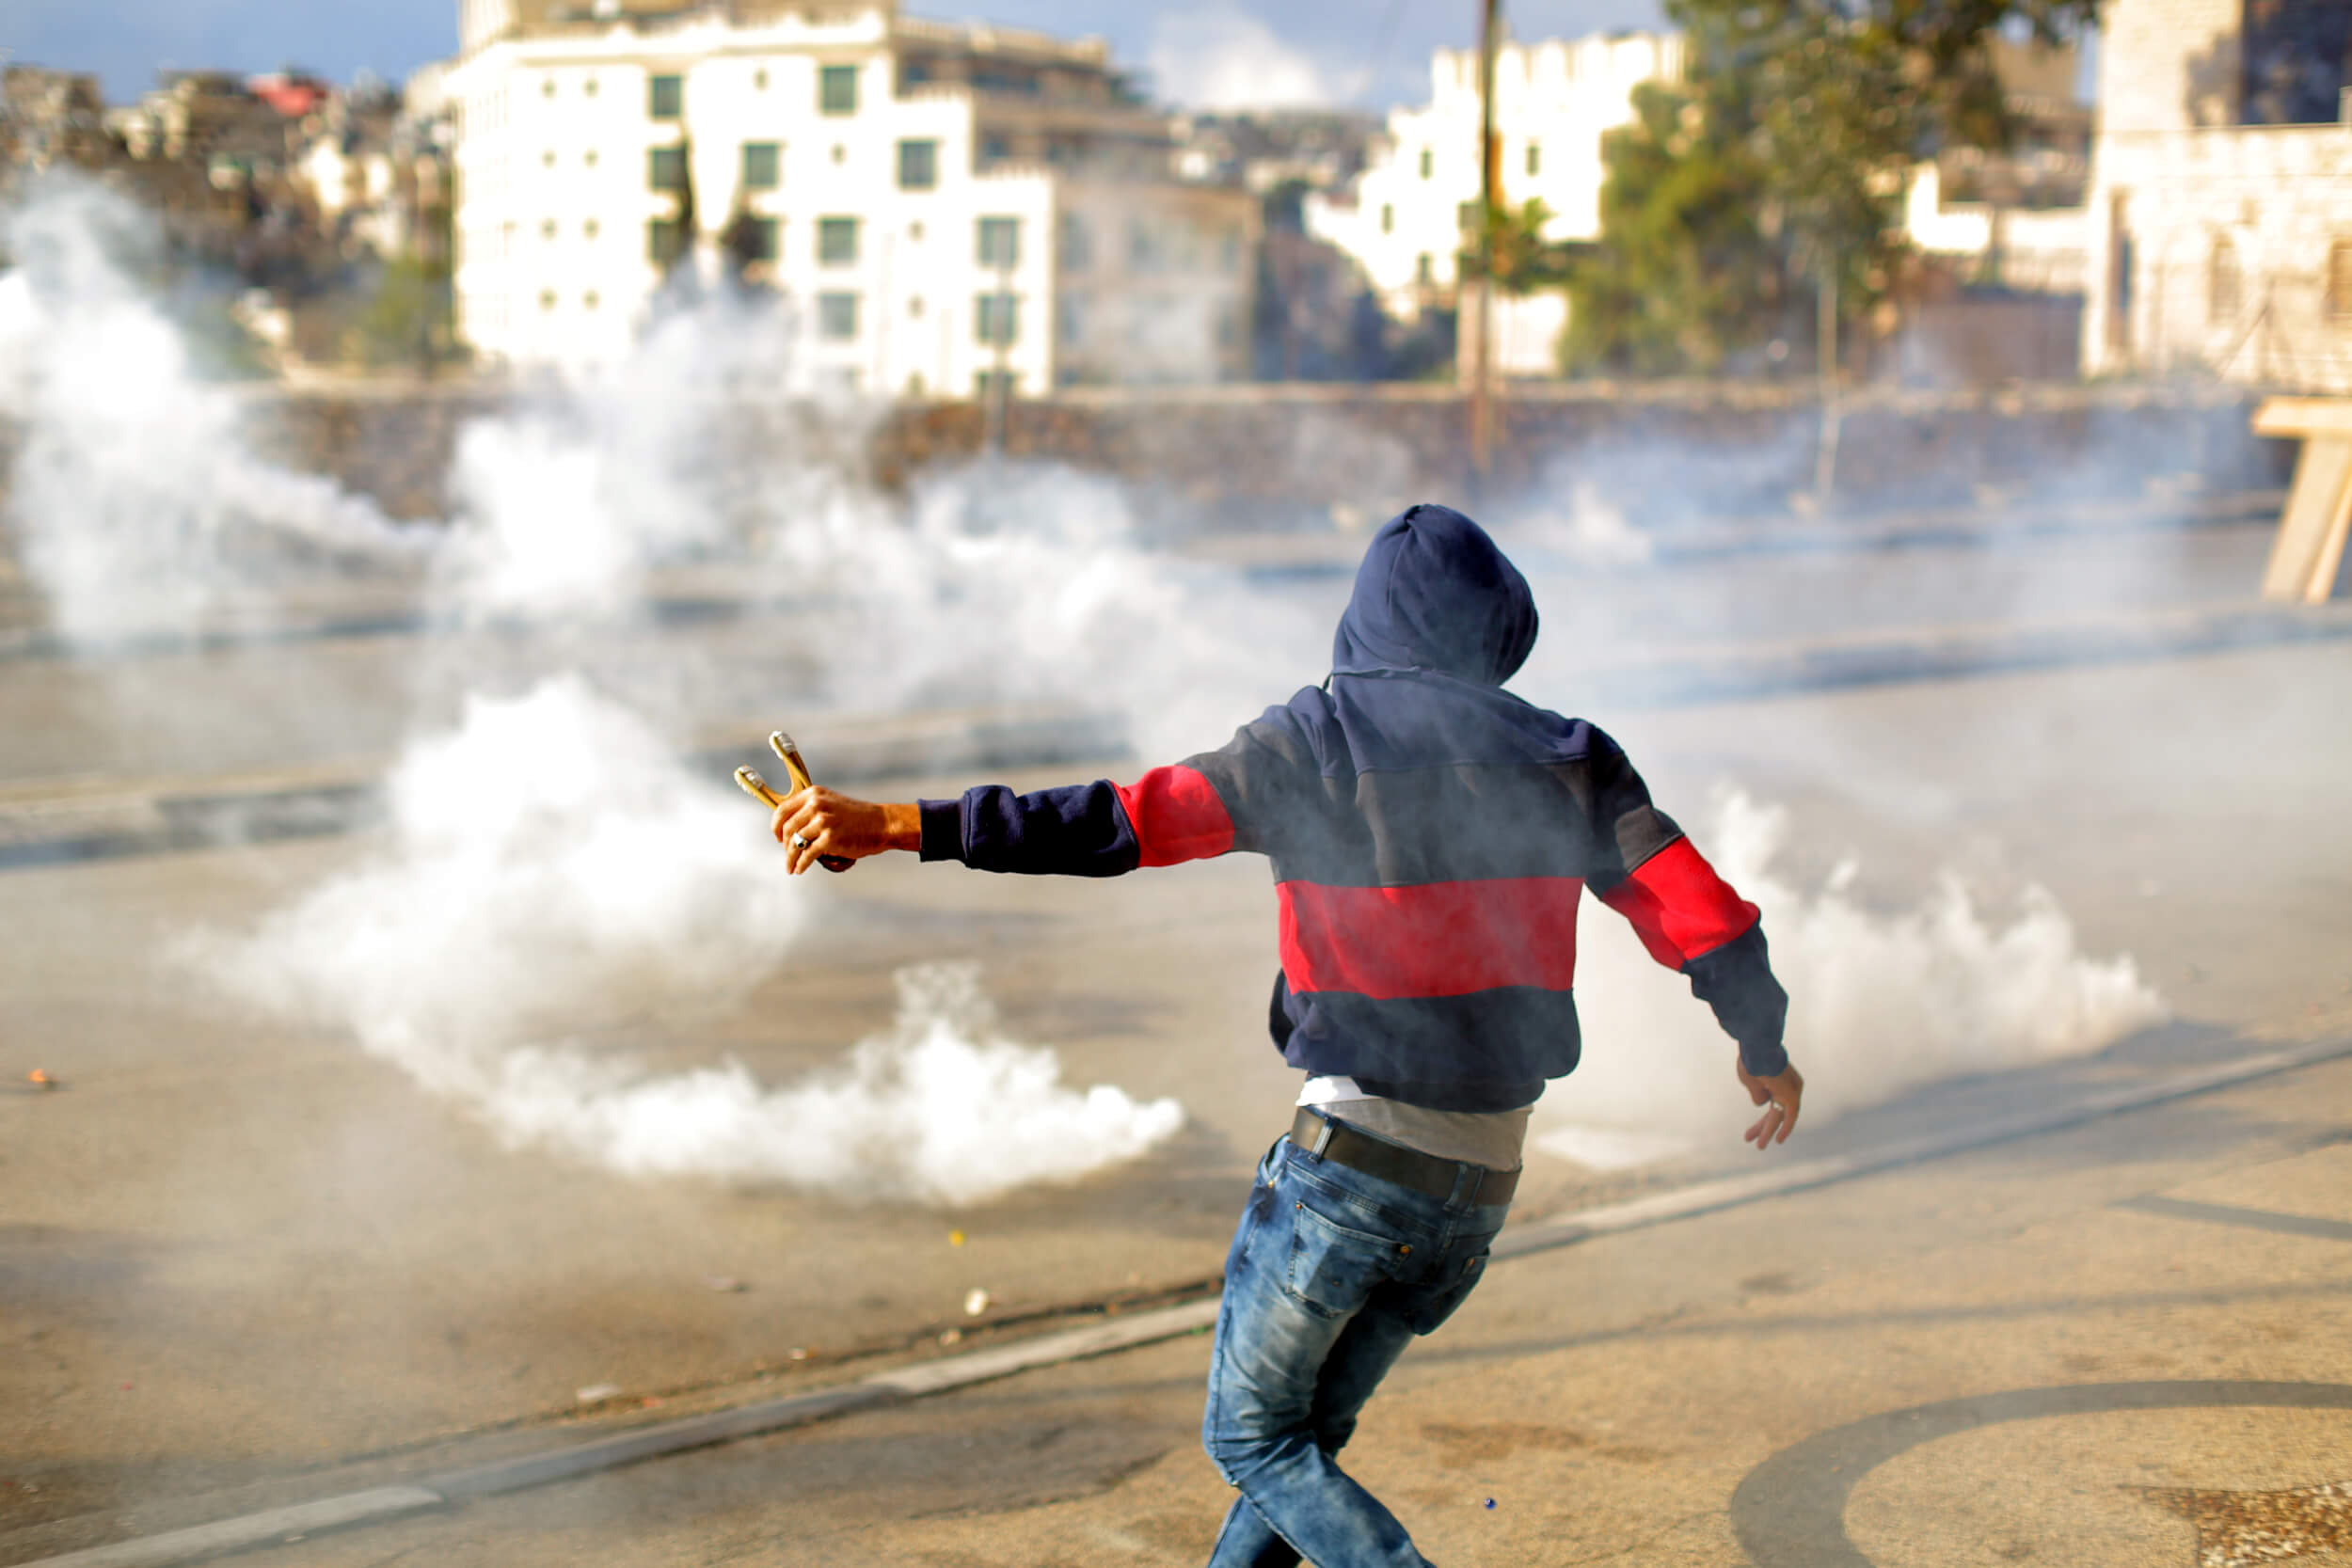 A Young man fires off one last rock from his sling shot before retreating away from the noxious gas. (Photo: Abed al Qaisi)